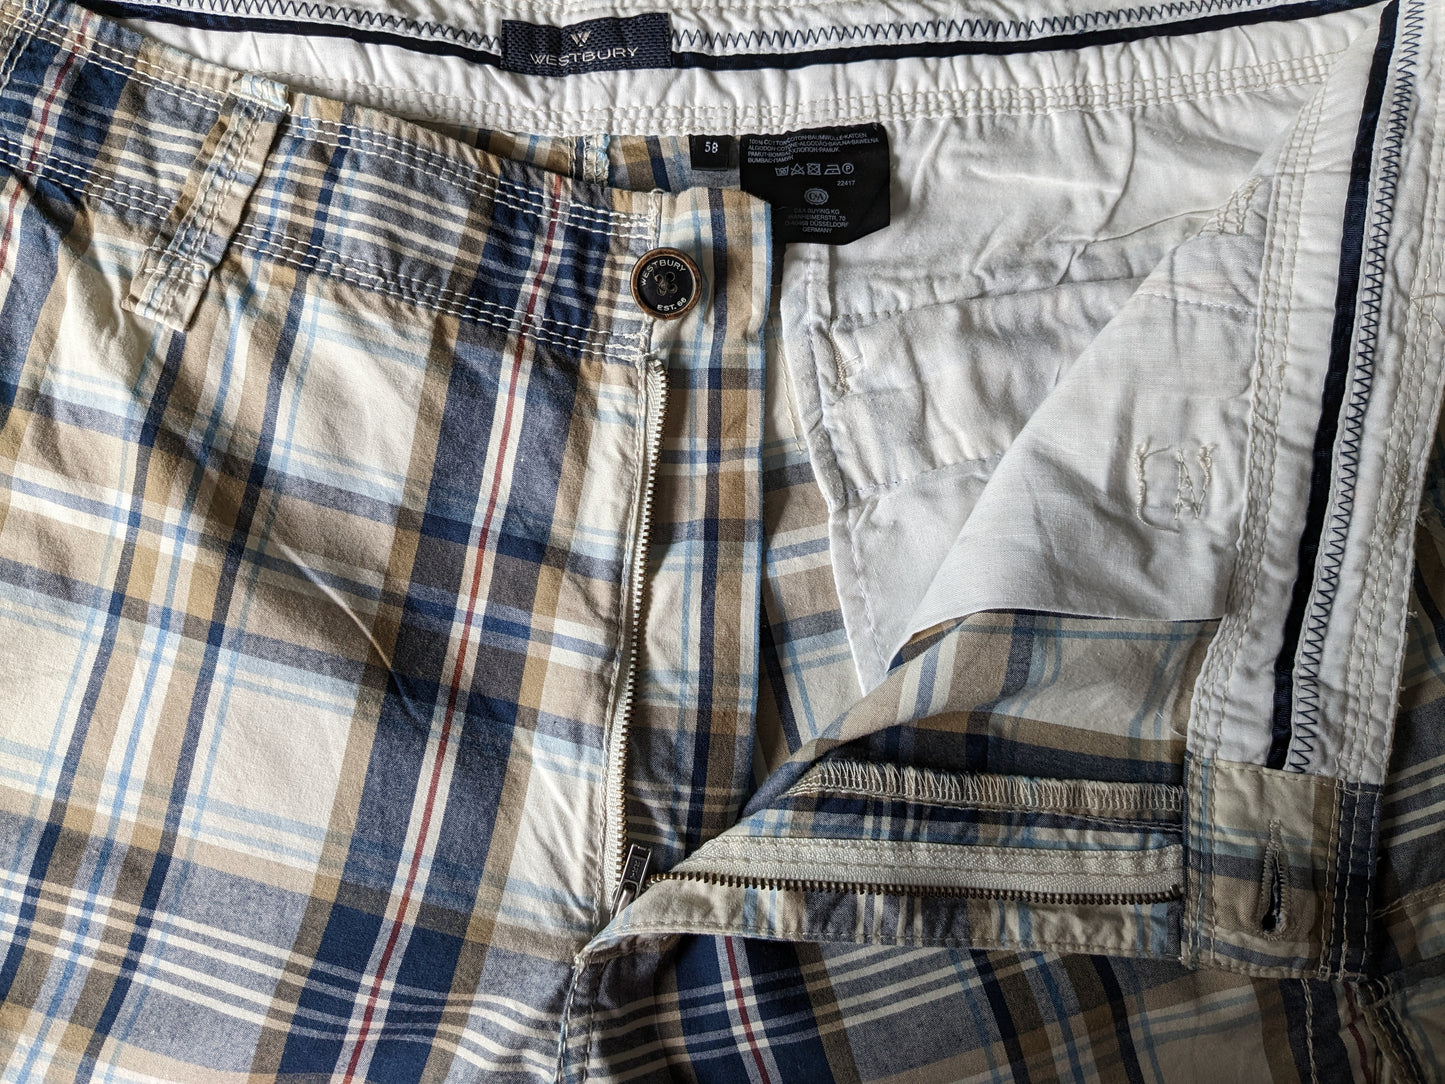 Westbury shorts with bags. Brown beige blue checked. Size 58 / XL.